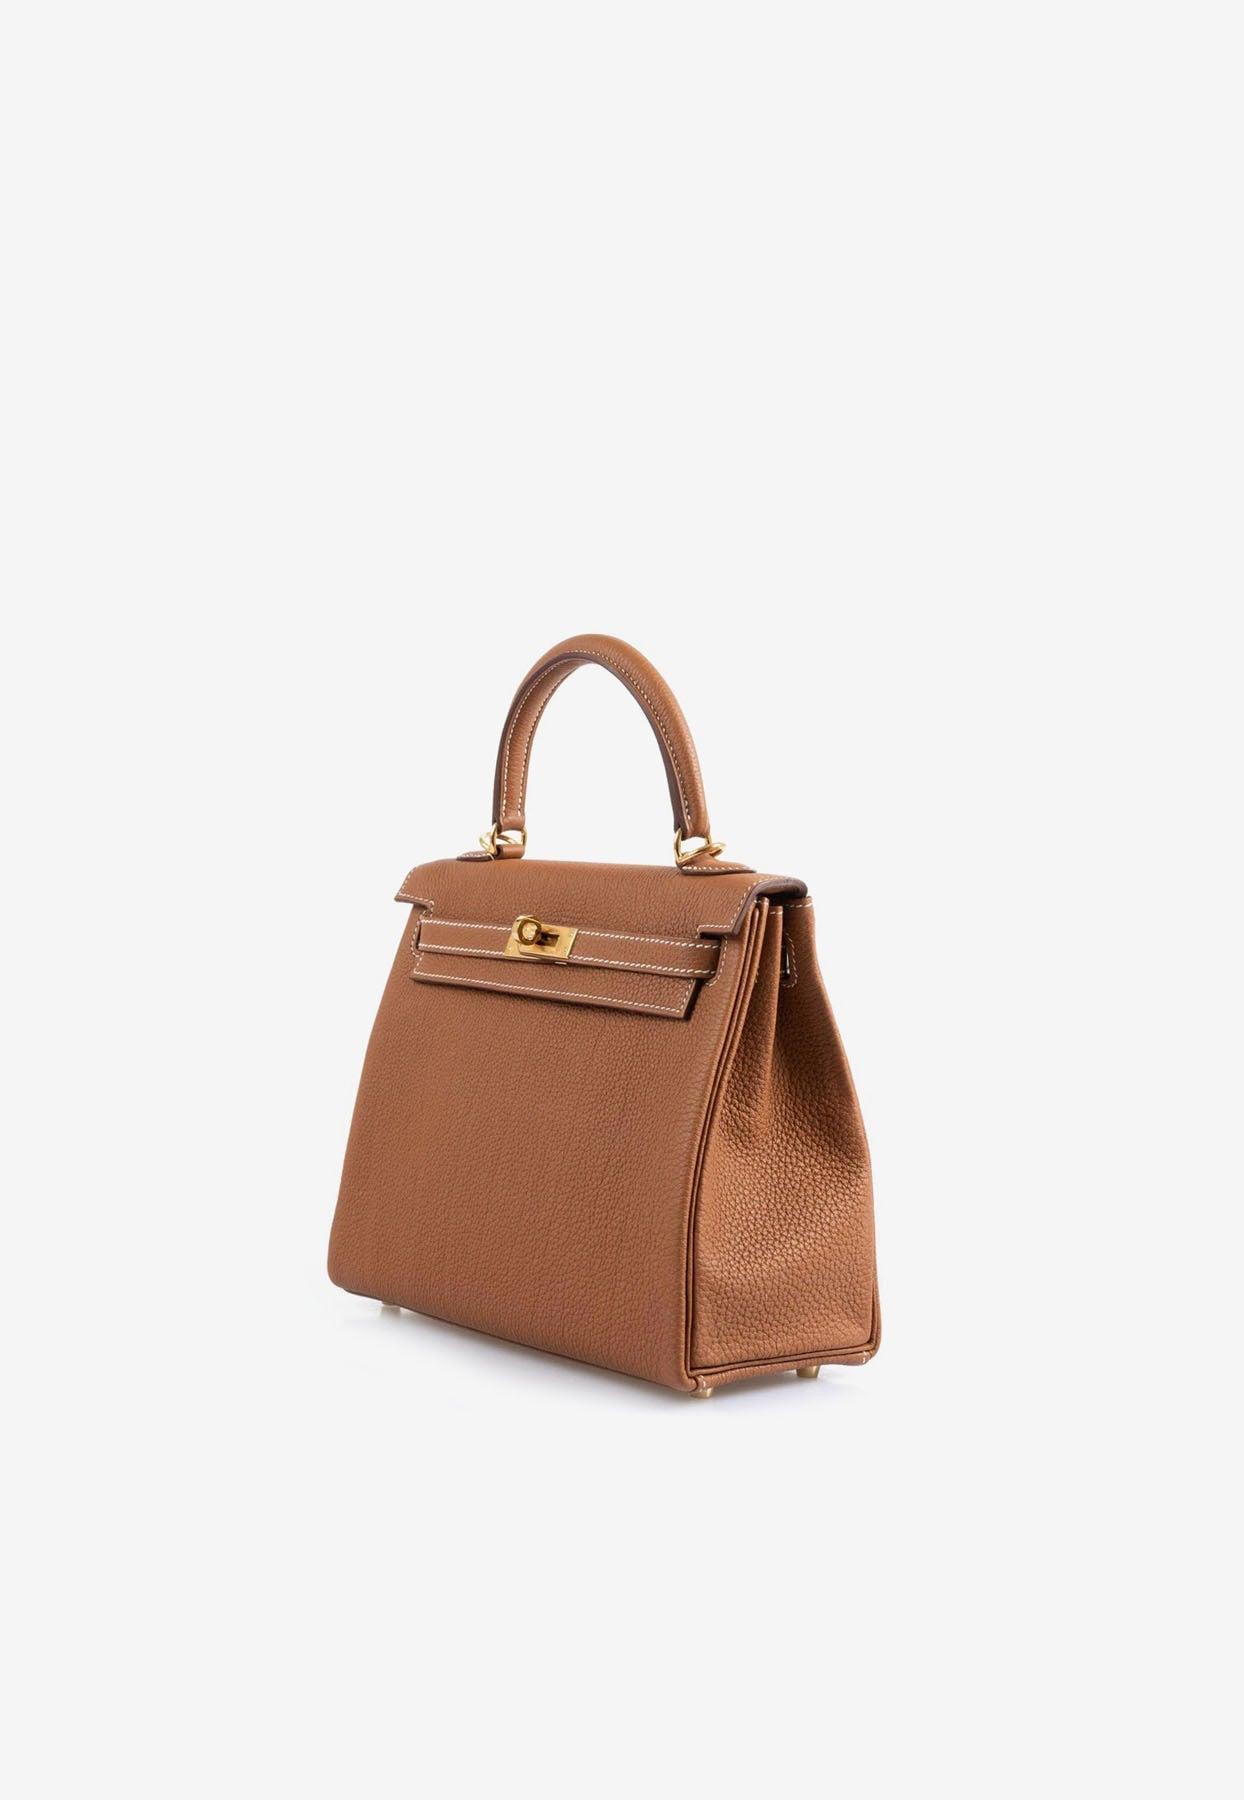 Hermès Kelly 25 Retourne In Gold Togo With Gold Hardware in